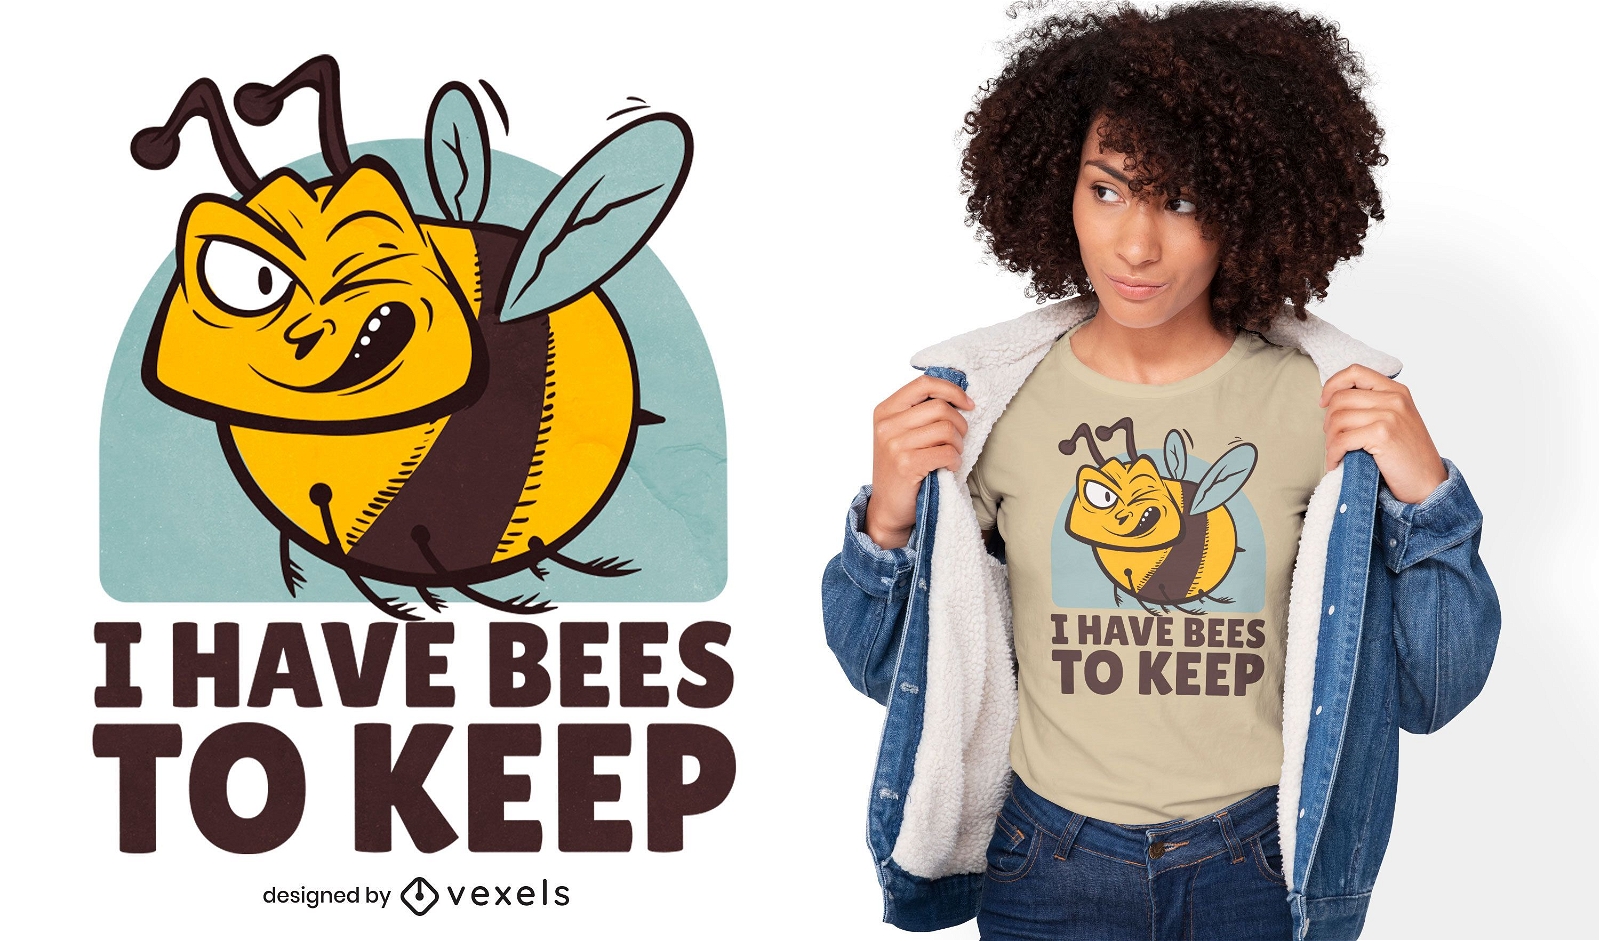 Bees to keep t-shirt design